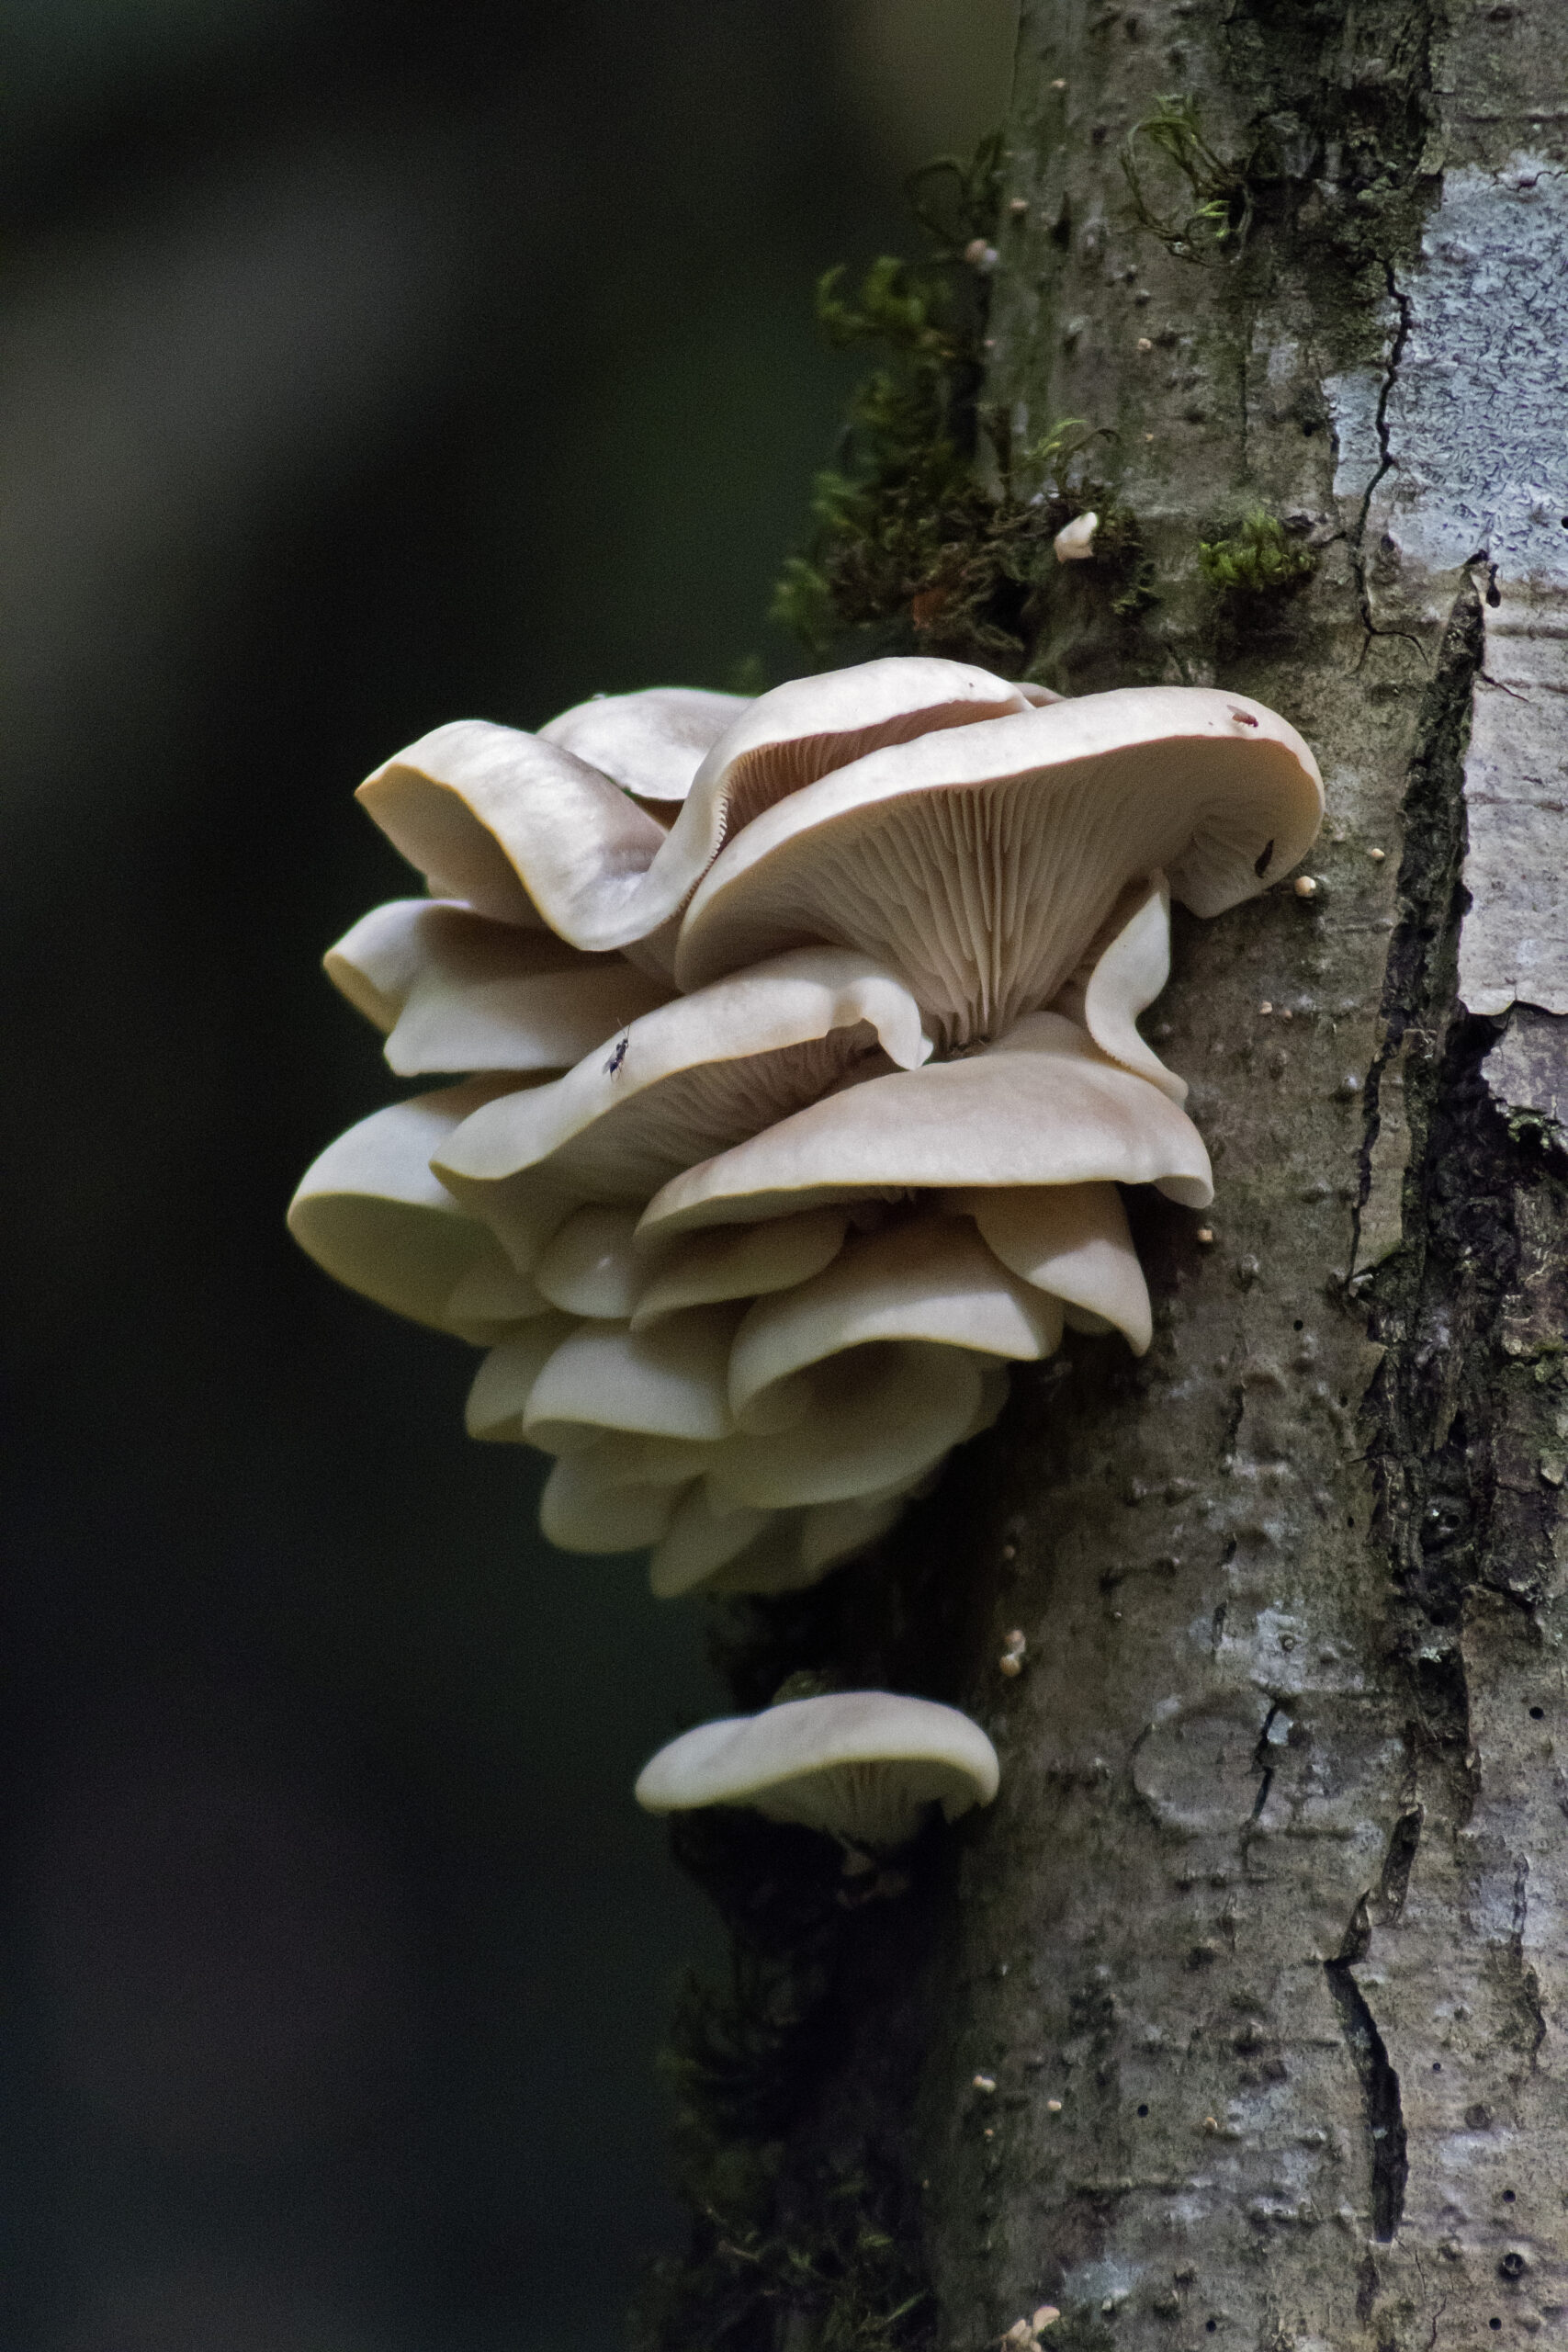 Possibly Oyster Mushrooms, May 12, 2021